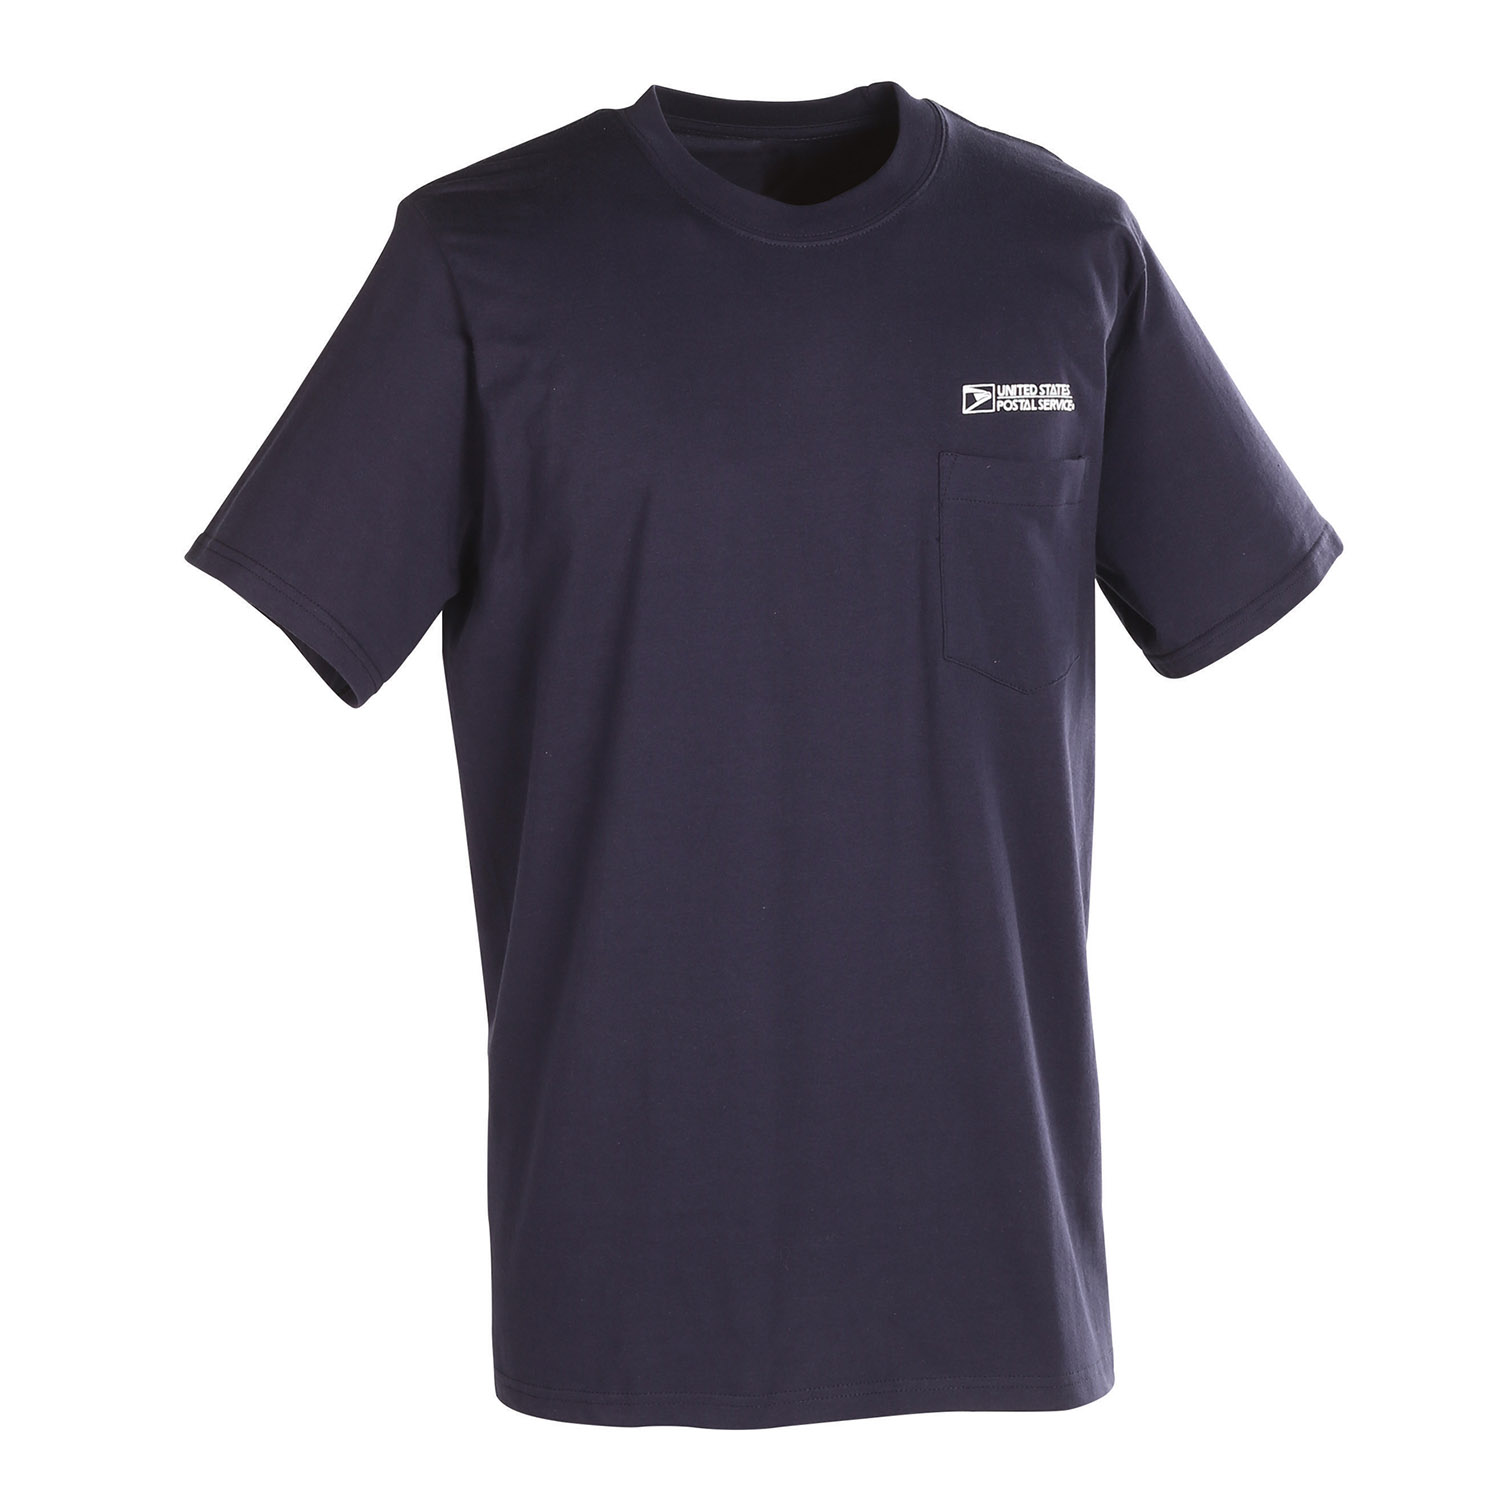 Postal T Shirt for Mail Handlers and Maintenance Personnel (